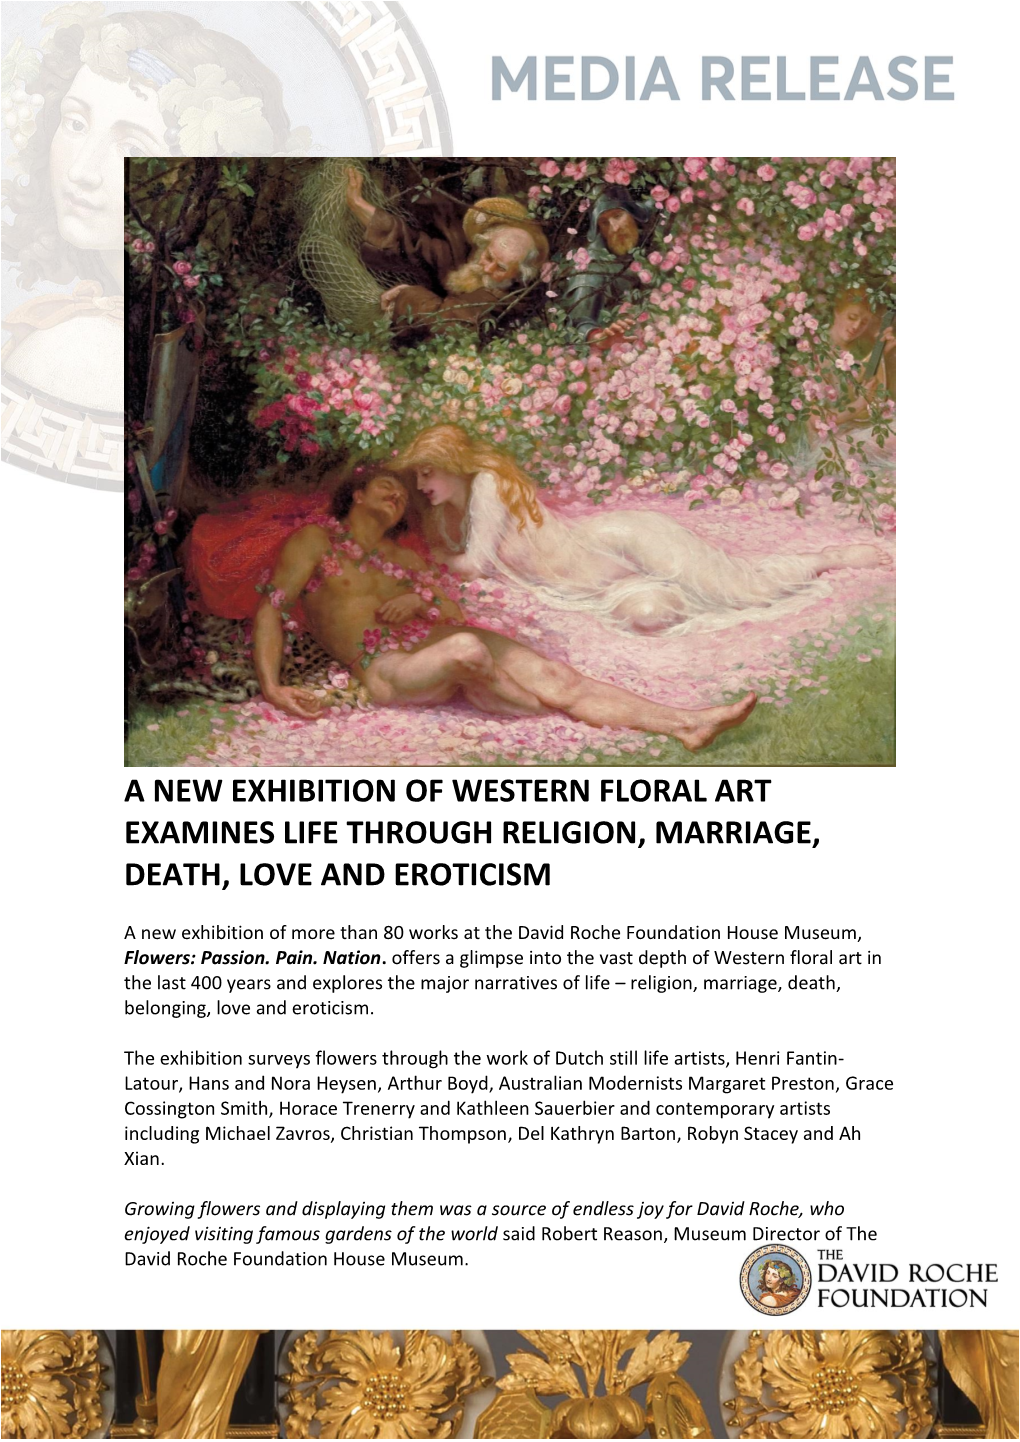 A New Exhibition of Western Floral Art Examines Life Through Religion, Marriage, Death, Love and Eroticism